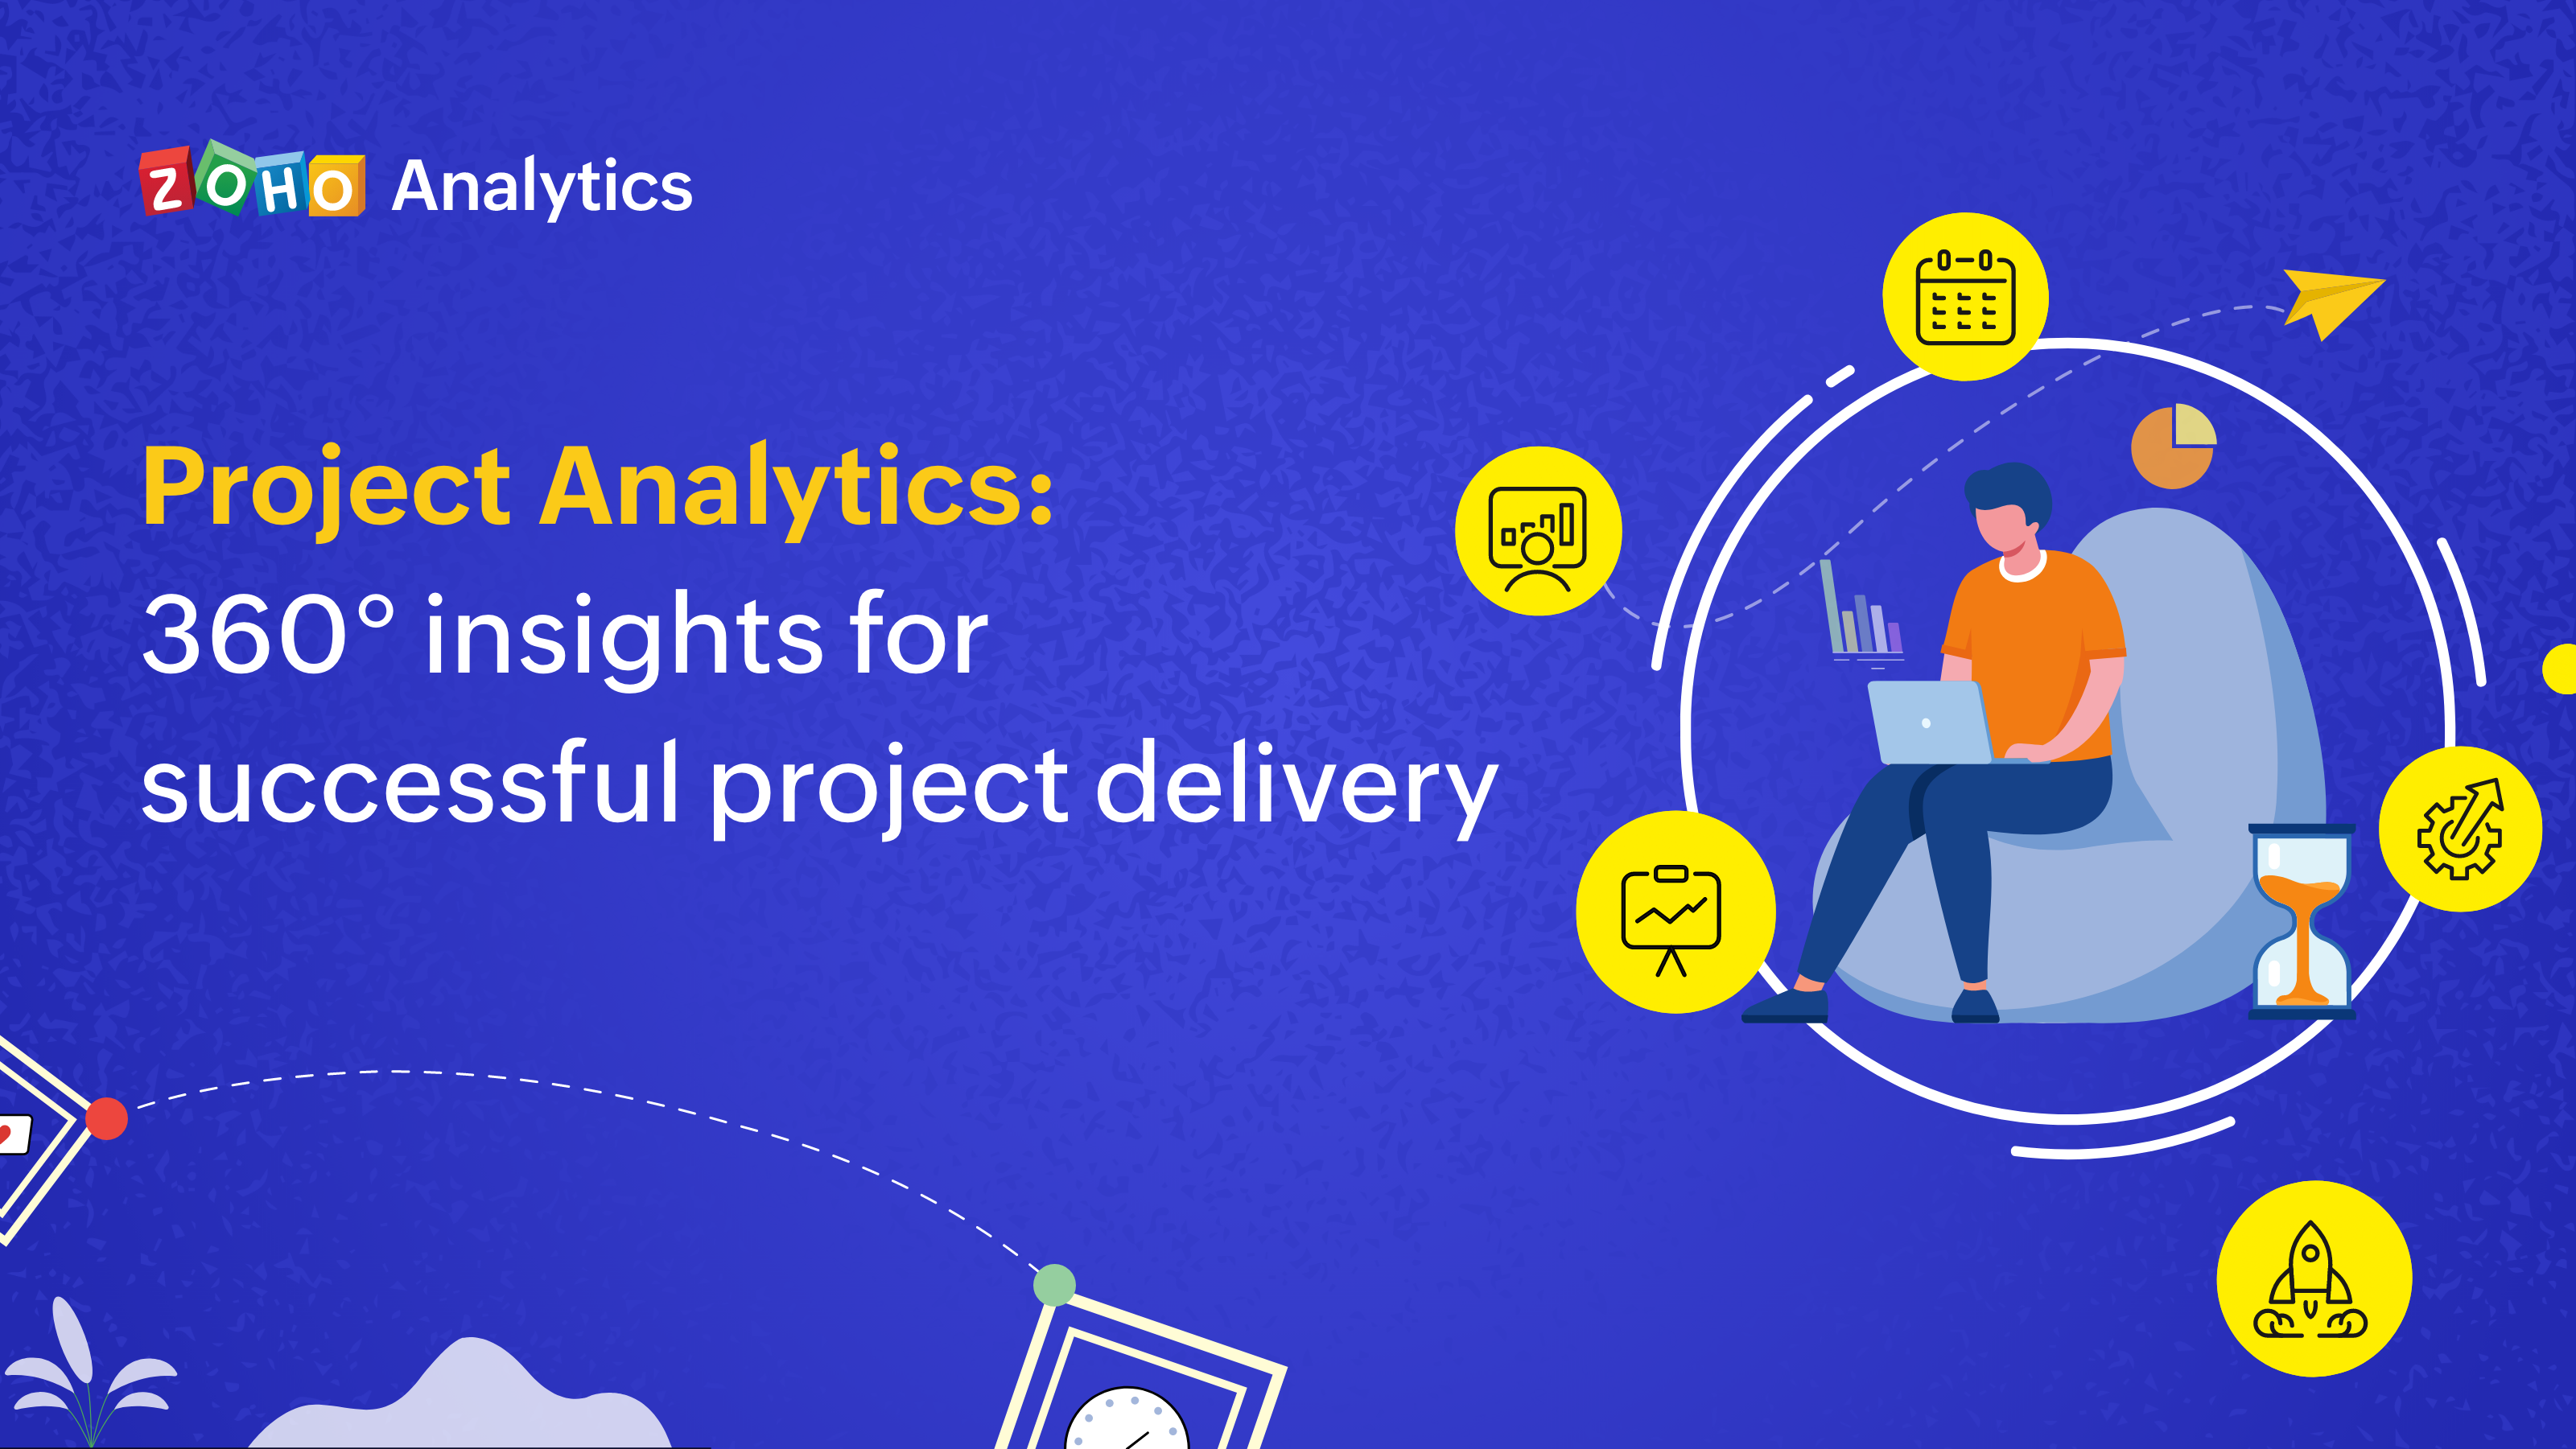 Project analytics: 360° insights for successful project delivery